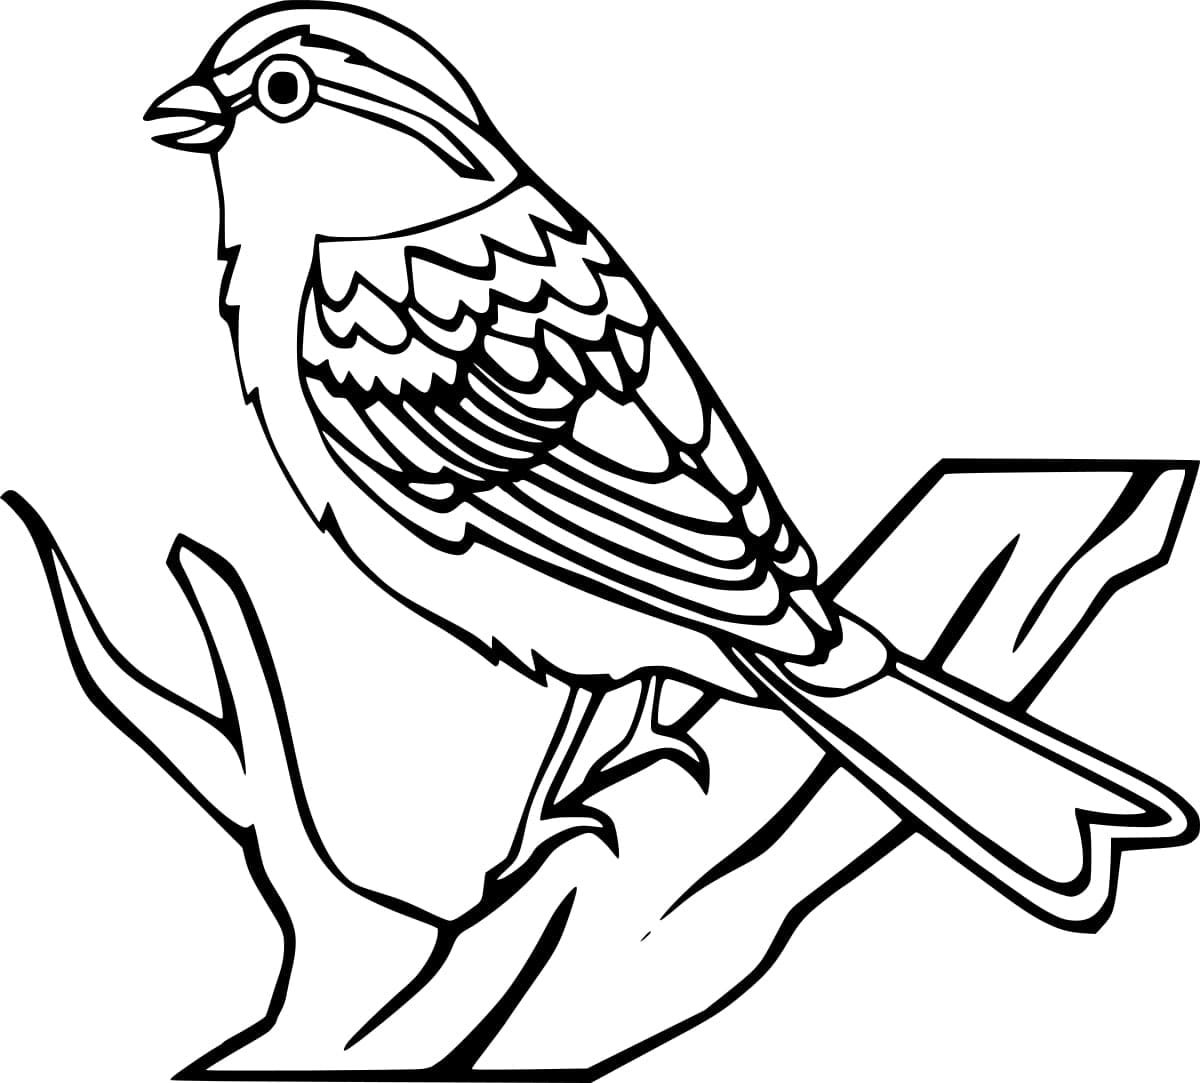 Regular Robin Bird coloring page - Download, Print or Color Online for Free